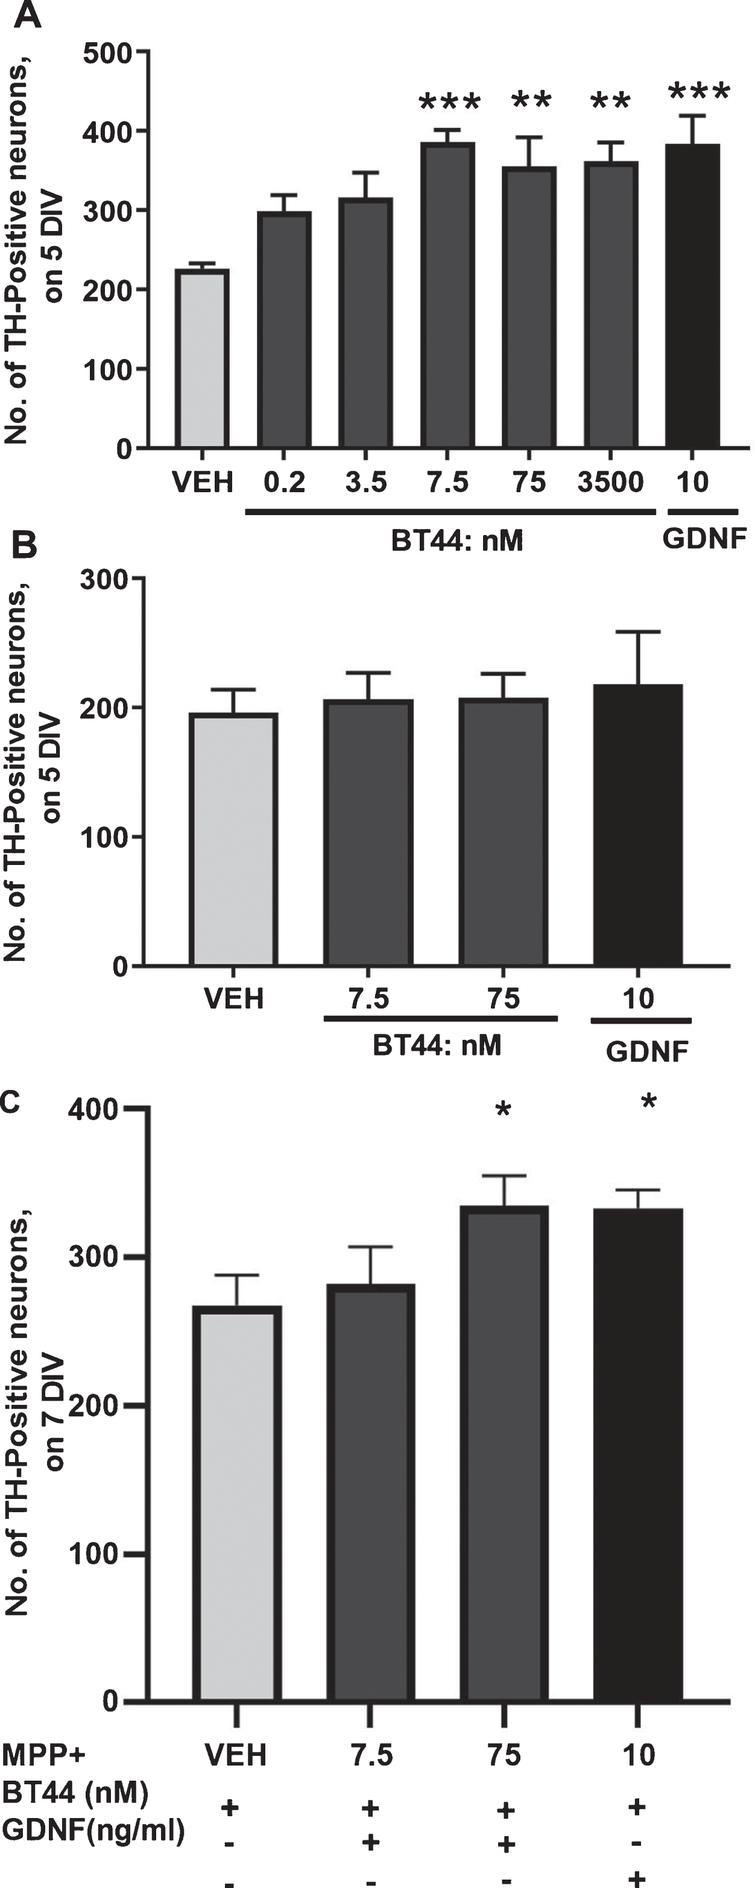 BT44 promotes the survival of cultured wild-type primary dopamine neurons, but not RET knockout dopamine neurons and protects cultured dopamine neurons against MPP + induced cell death. A) Effect of BT44 and GDNF on the number of TH-ir cells in wild-type midbrain cultures after 5 days in vitro (5 DIV). B) The number of TH-ir cells in RET knockout midbrain cultures on the 5th day in vitro (5 DIV). C) The number of TH-ir cells in wild-type midbrain cultures exposed to MPP + . The number of TH-ir cells is normalized to the total number of cells in the culture. Concentration of GDNF used as a positive control is provided in ng/ml (10 ng/ml, ≃0.33 nM). VEH, Vehicle. *p < 0.05, **p < 0.01, ***p < 0.001, RM ANOVA with Dunnett’s post hoc test. Mean±SEM, Number of independent repeats (n) = 4 for wild-type and (n) = 2 for RET knockout dopamine neuron cultures. Neuroprotection experiment was repeated 5 times with reproducible results and N is the number of wells from one experiment, N = 6.